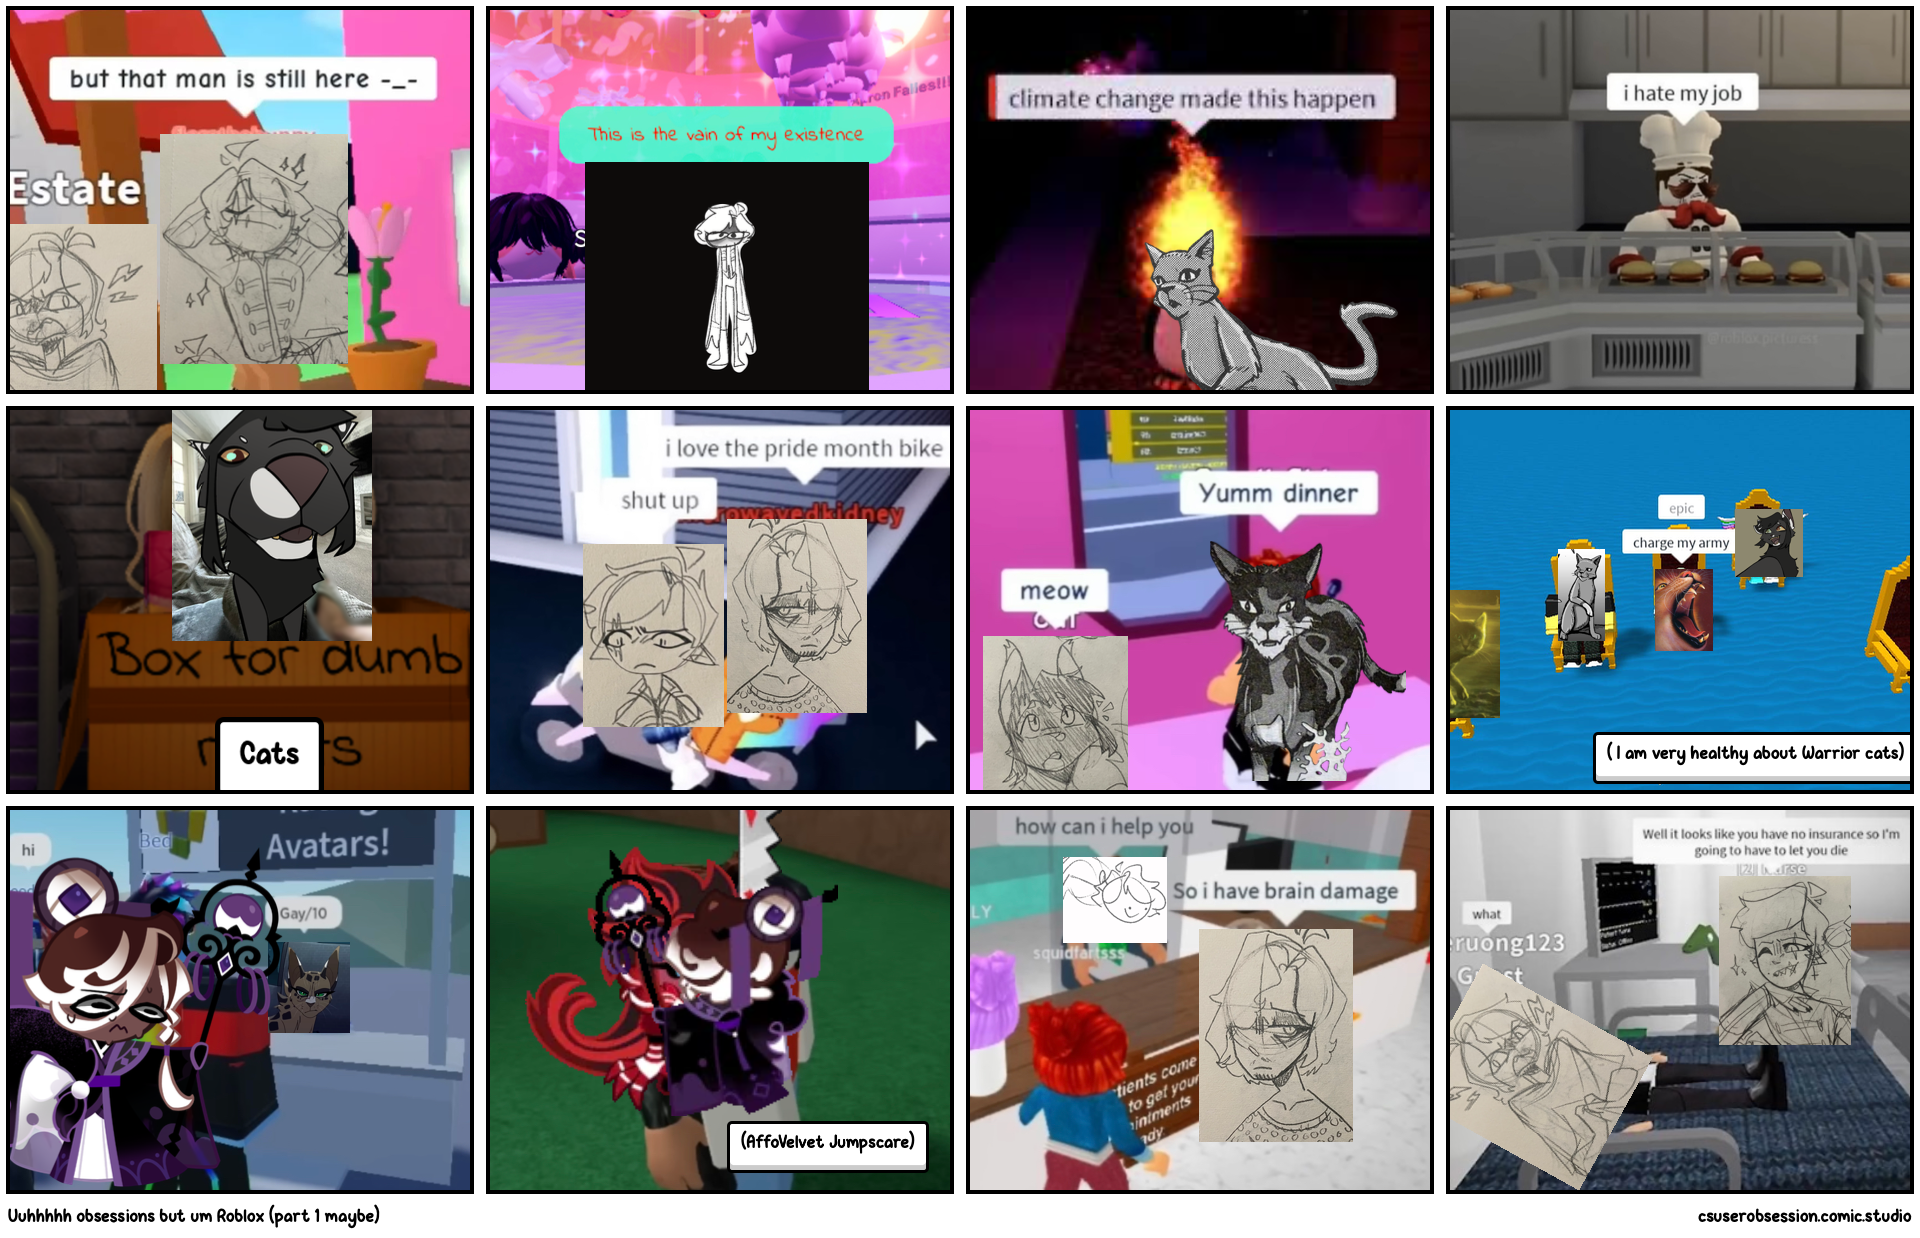 Uuhhhhh obsessions but um Roblox (part 1 maybe)